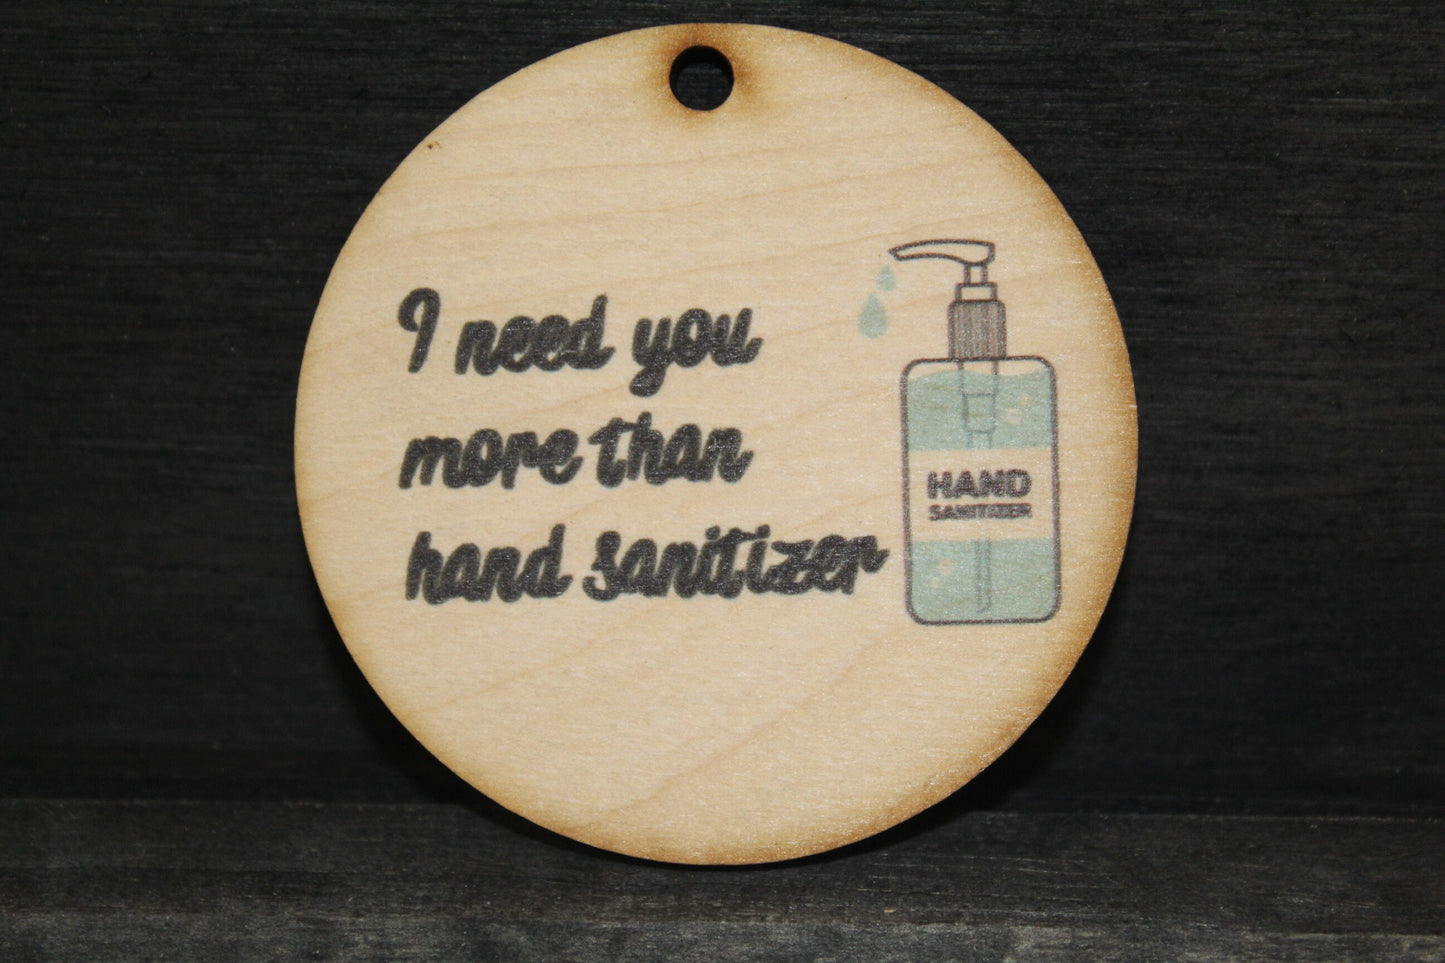 I Need You More Than Hand Sanitizer Germs Christmas Ornament Funny Joke Couple Gift Wood Handmade Keychain Cute